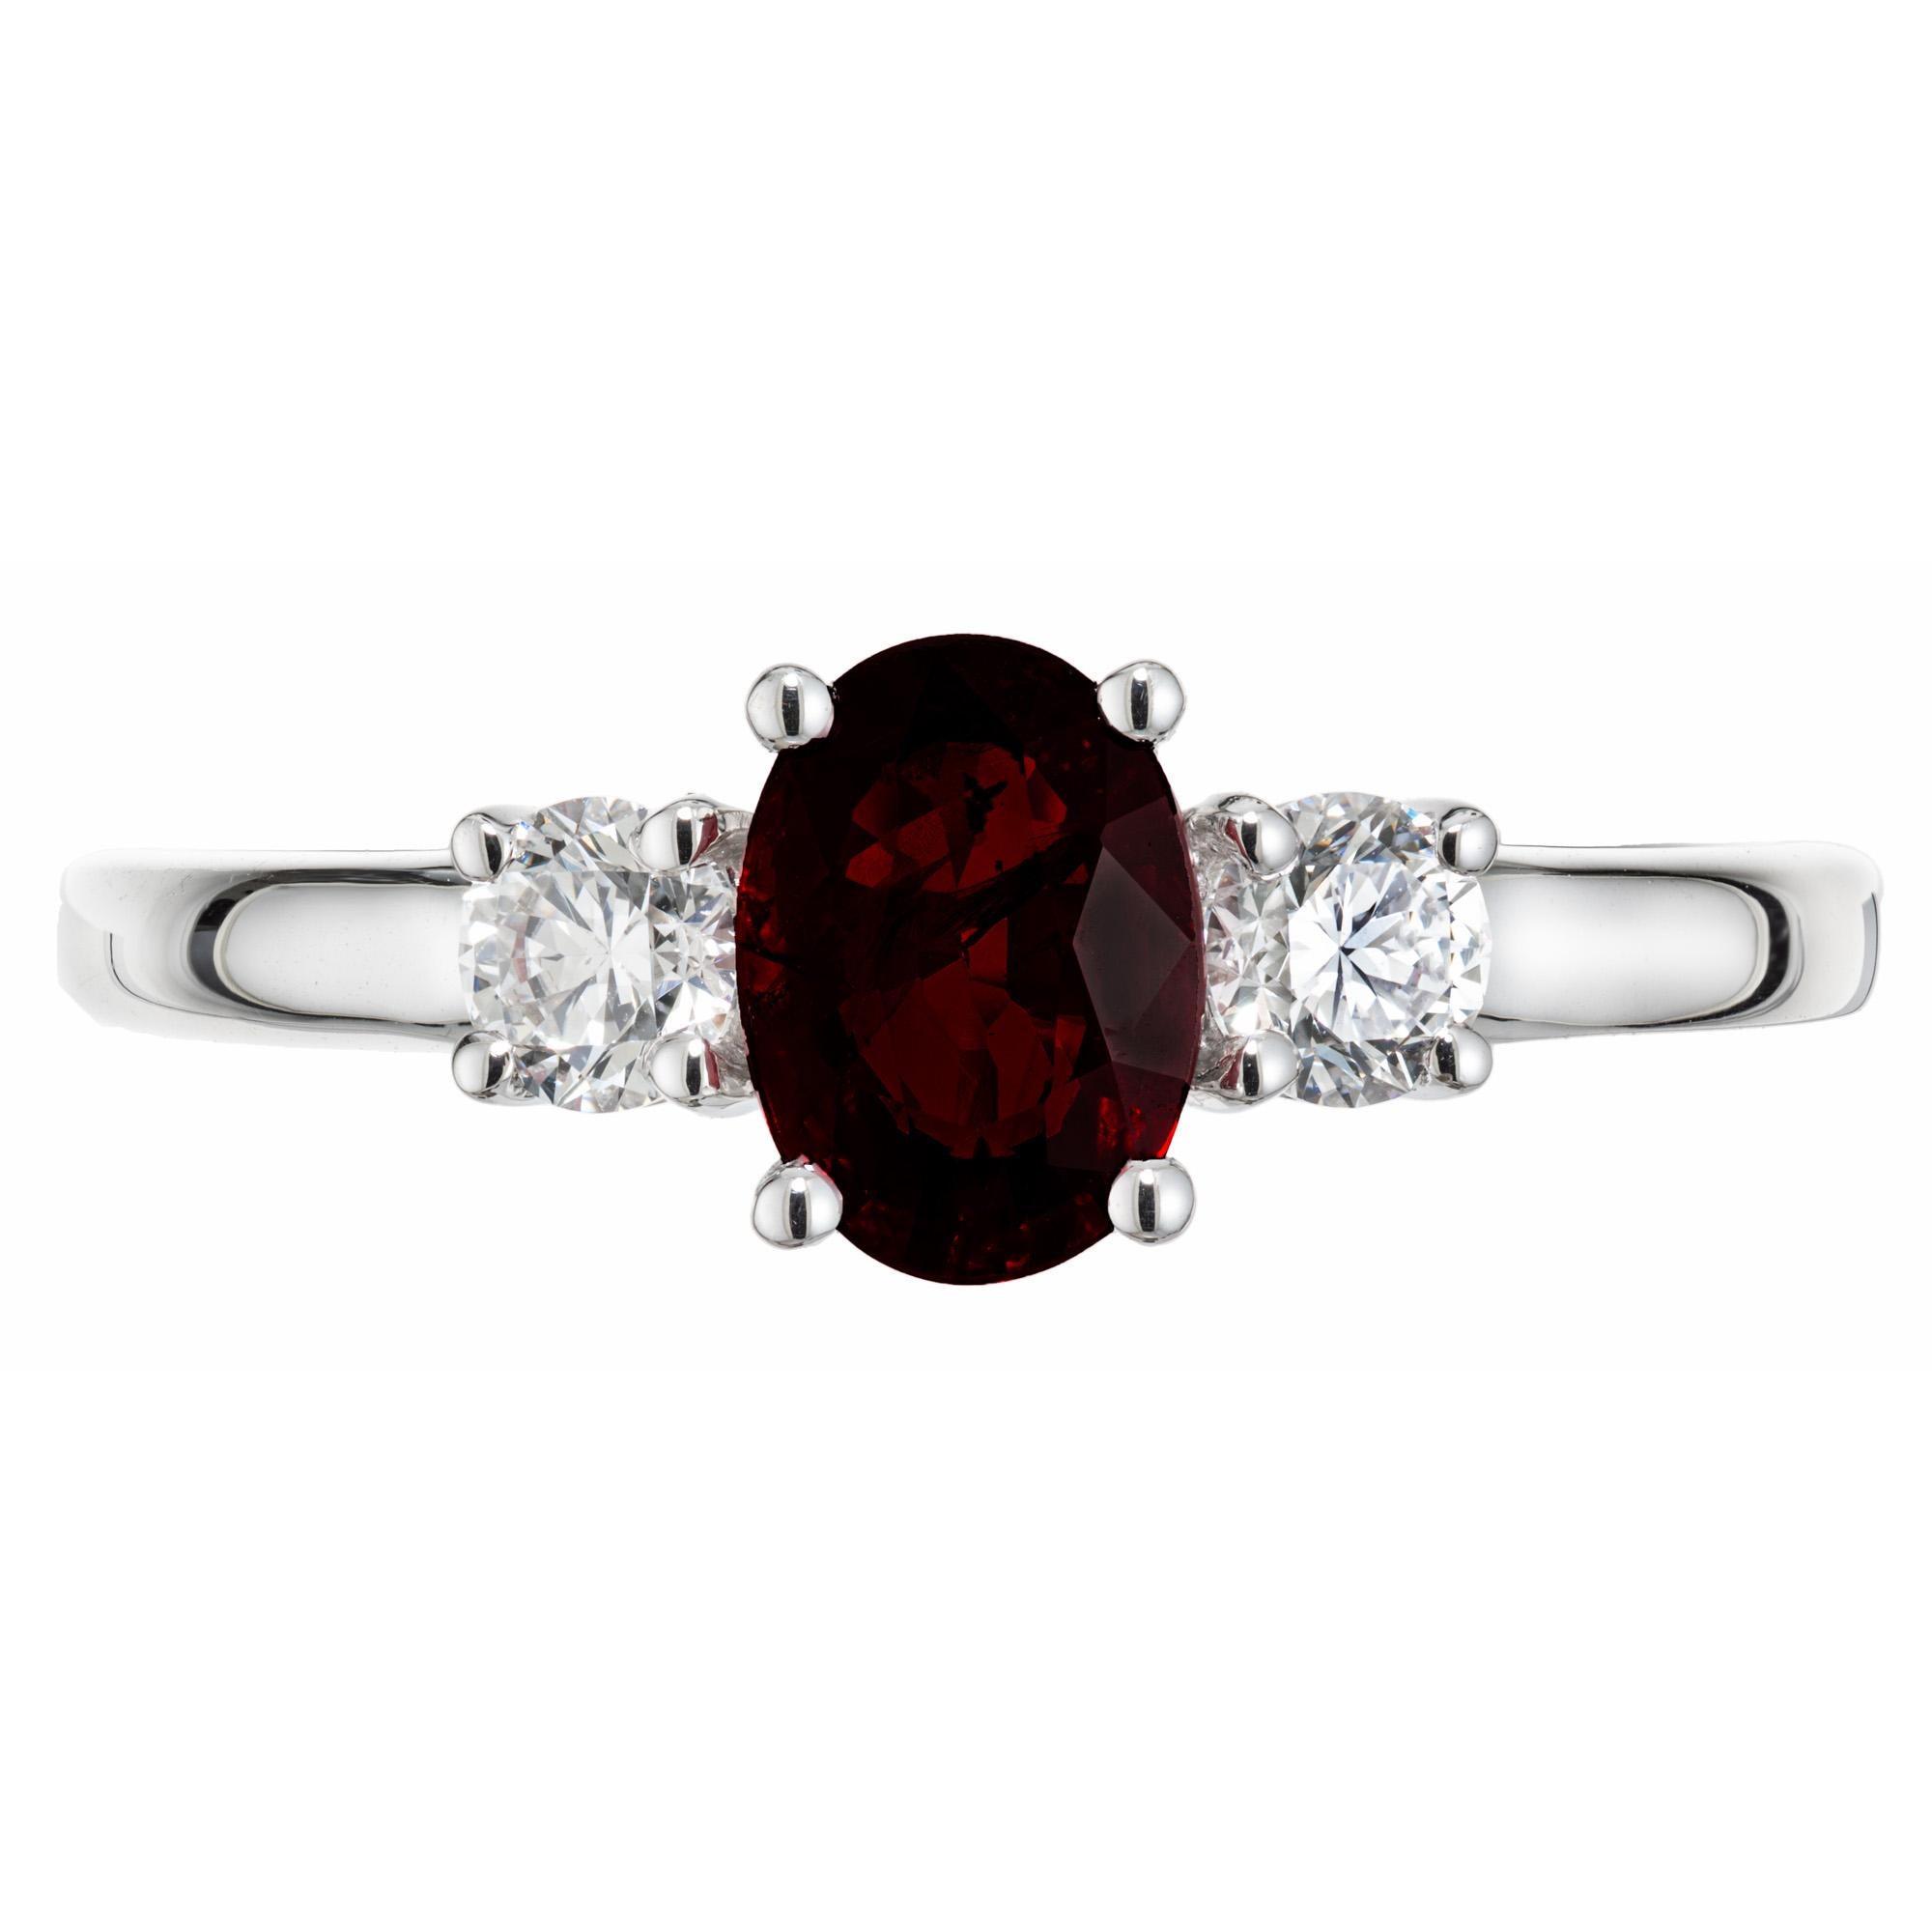 Simple and elegant ruby and diamond engagement ring. GAL certified oval natural no heat ruby center stone mounted in a three-stone 18k white gold setting. The ruby is accented by a round cut diamond on each side. This ring was designed and crafted